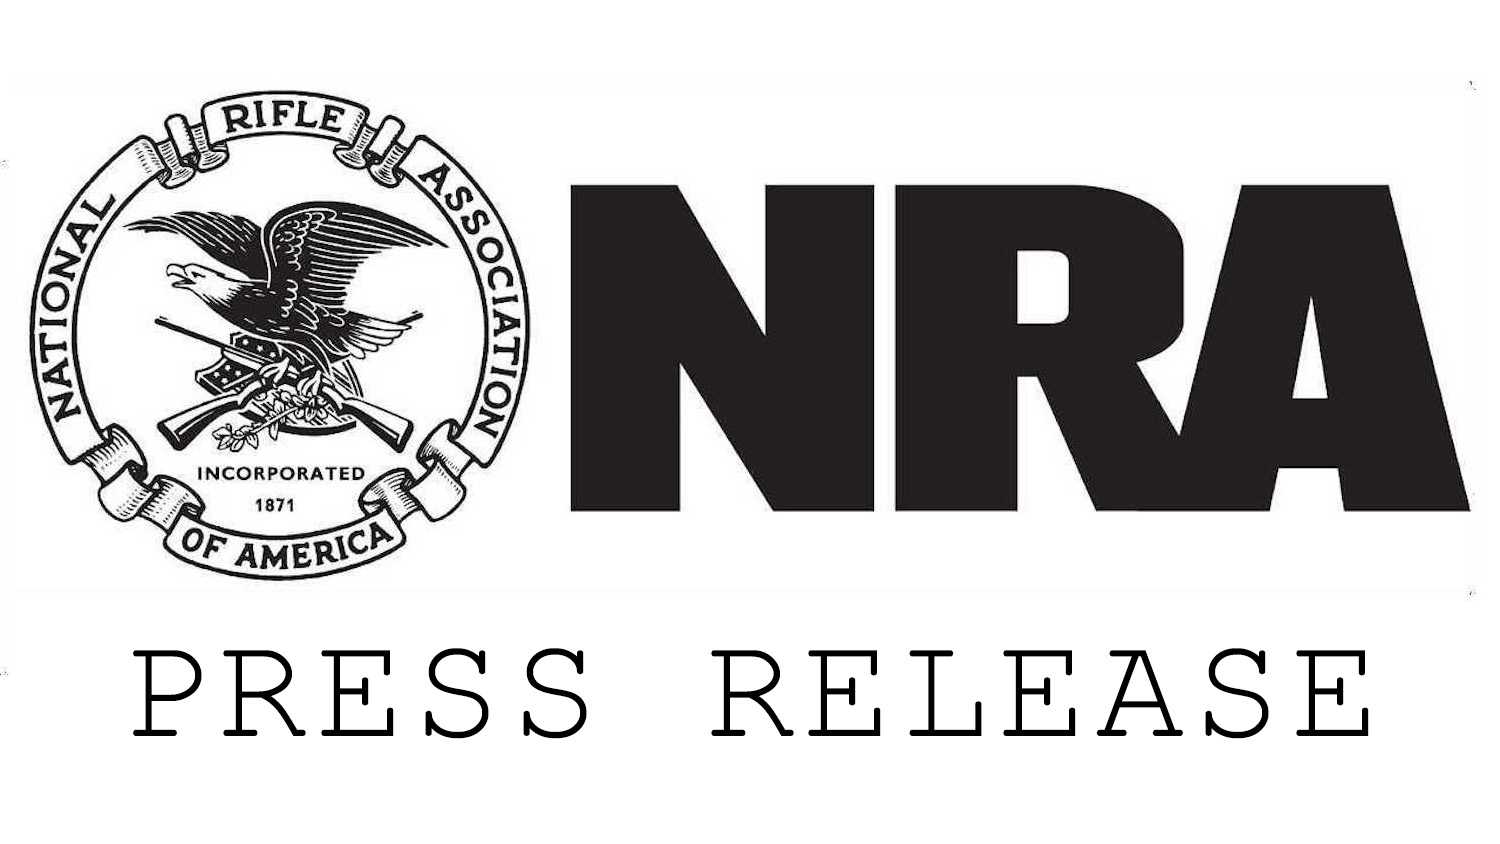 NRA Hunter Education Online Course Now Available in New Mexico